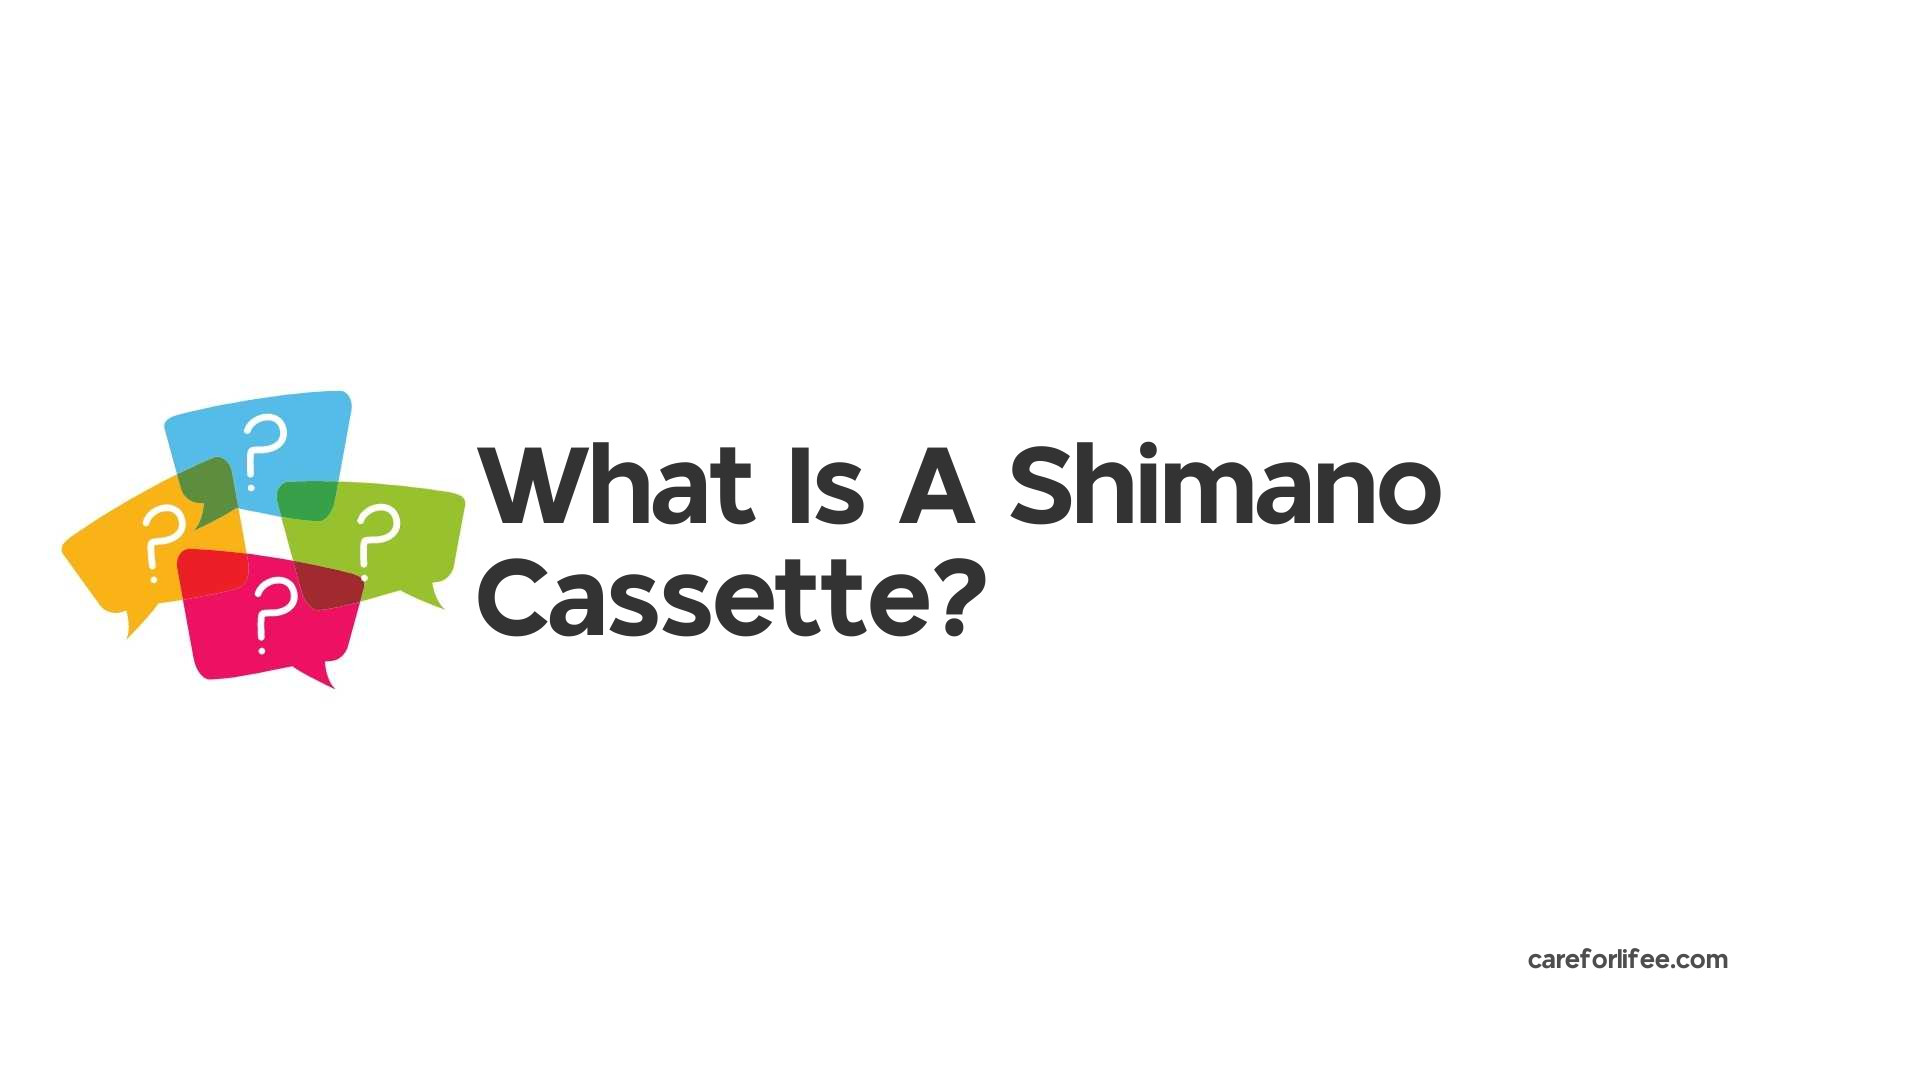 What Is A Shimano Cassette?